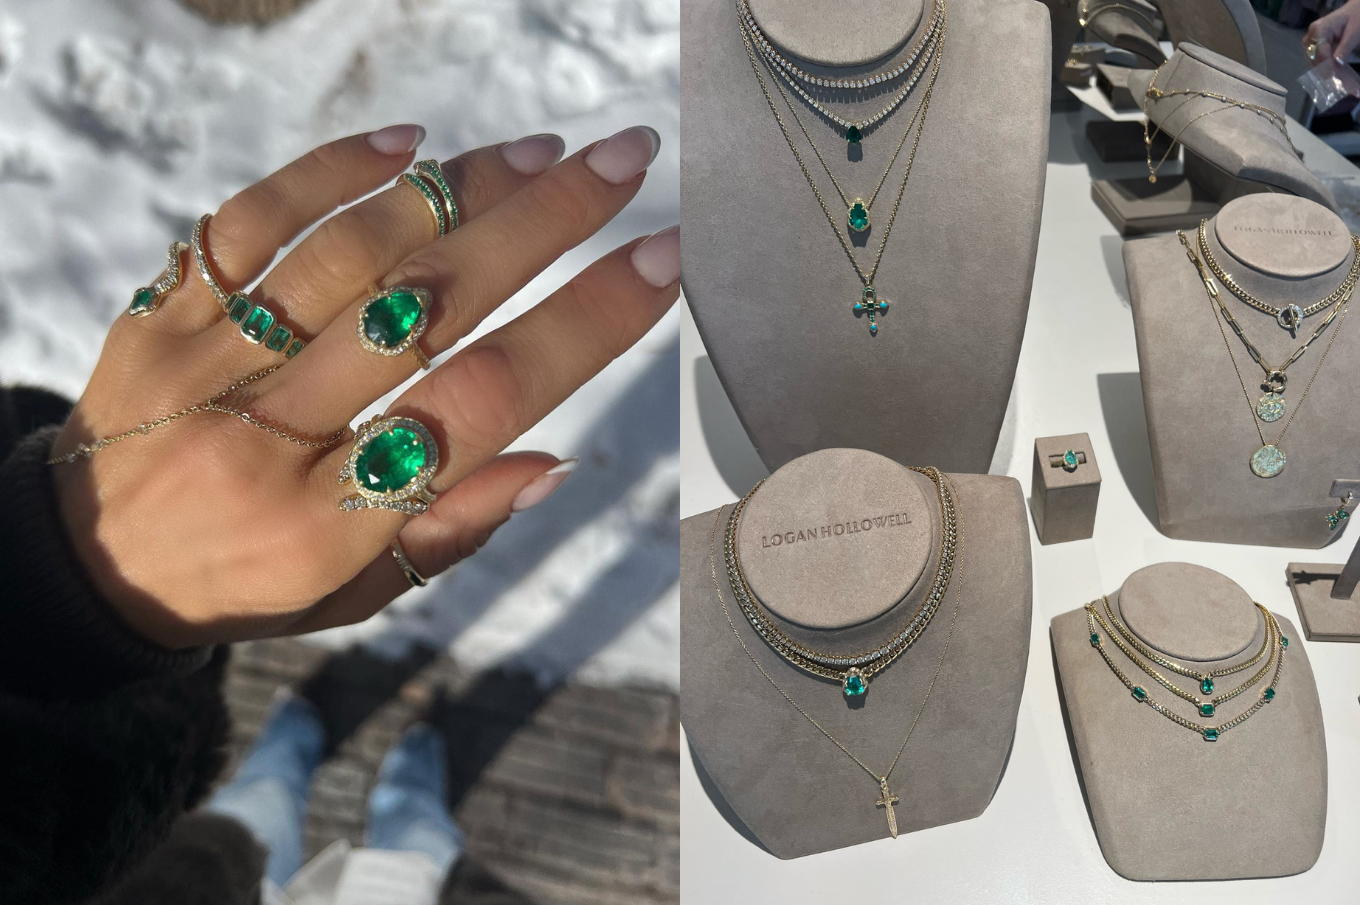 Left Image: Close up of hand with LH rings stacked with snowy background, Right Image: Four display necks layered with LH jewelry